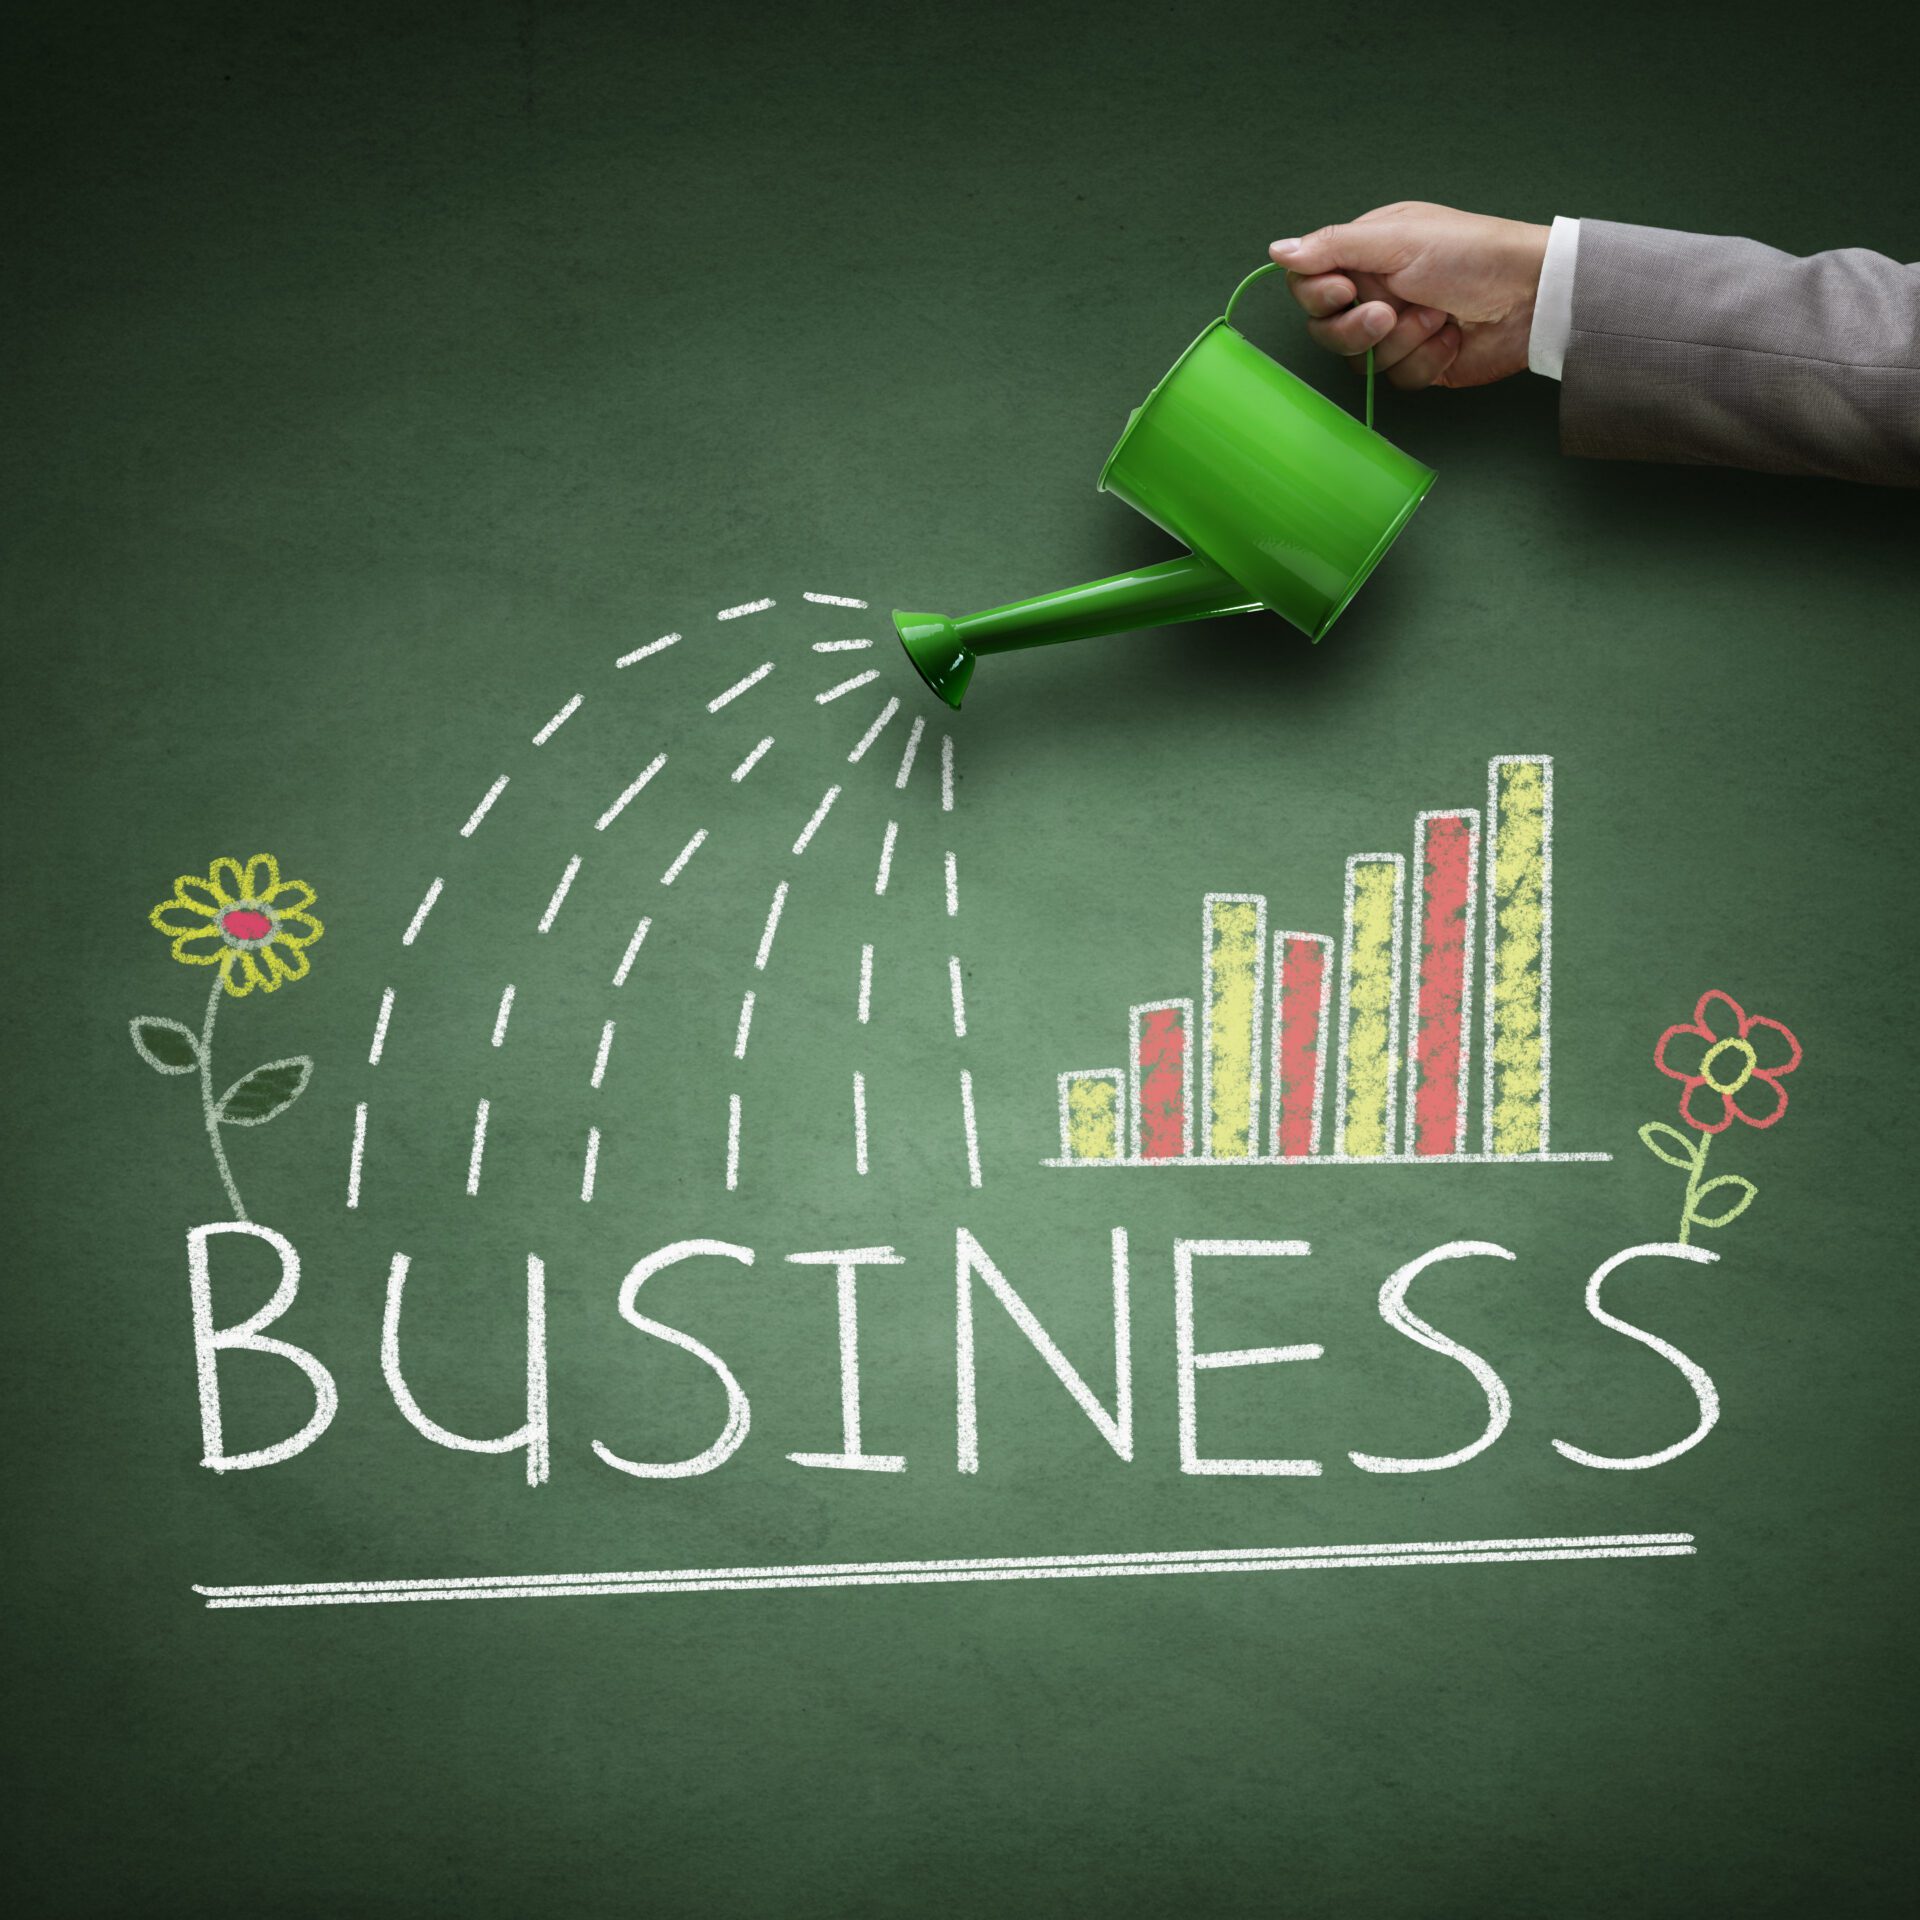 A green watering can being poured over the word ‘Business’ with flowers and a graph in chalk.